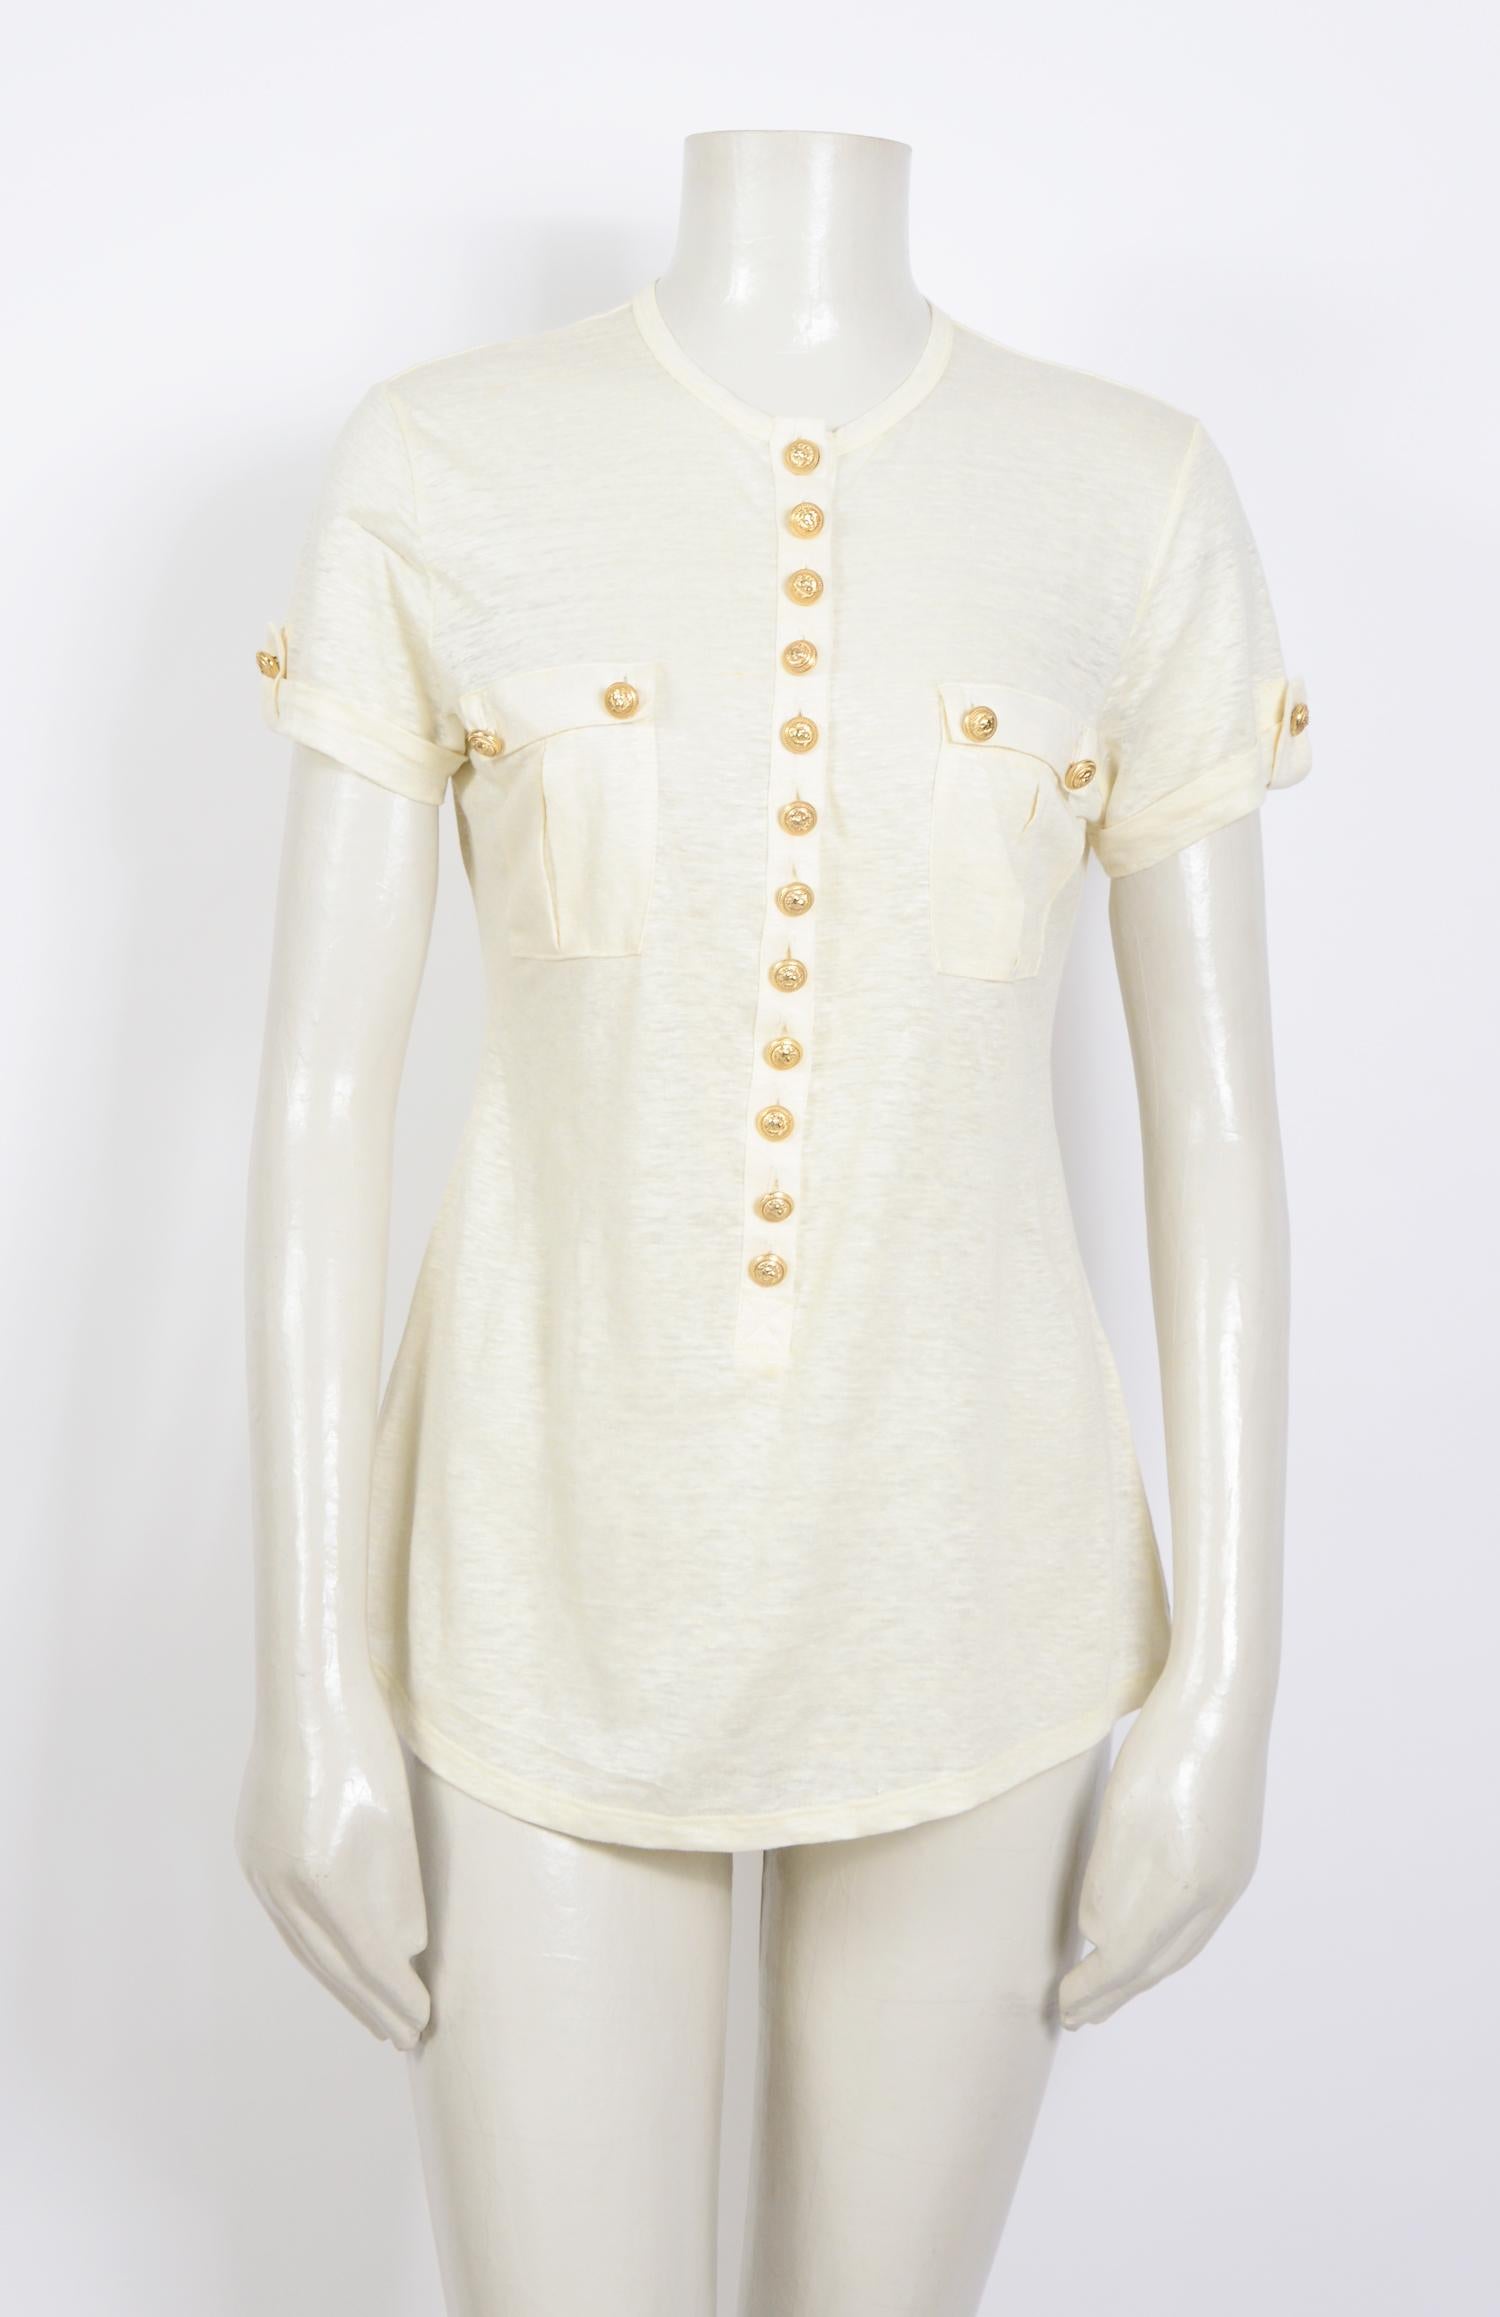 This short sleeve tee by Balmain made in pure cream linen is highlighted by embossed golden buttons for a military feel - a signature aesthetic of the brand.
Made in France - French size 36 - Twin chest pockets
Measurements are taken flat:
Ua to Ua